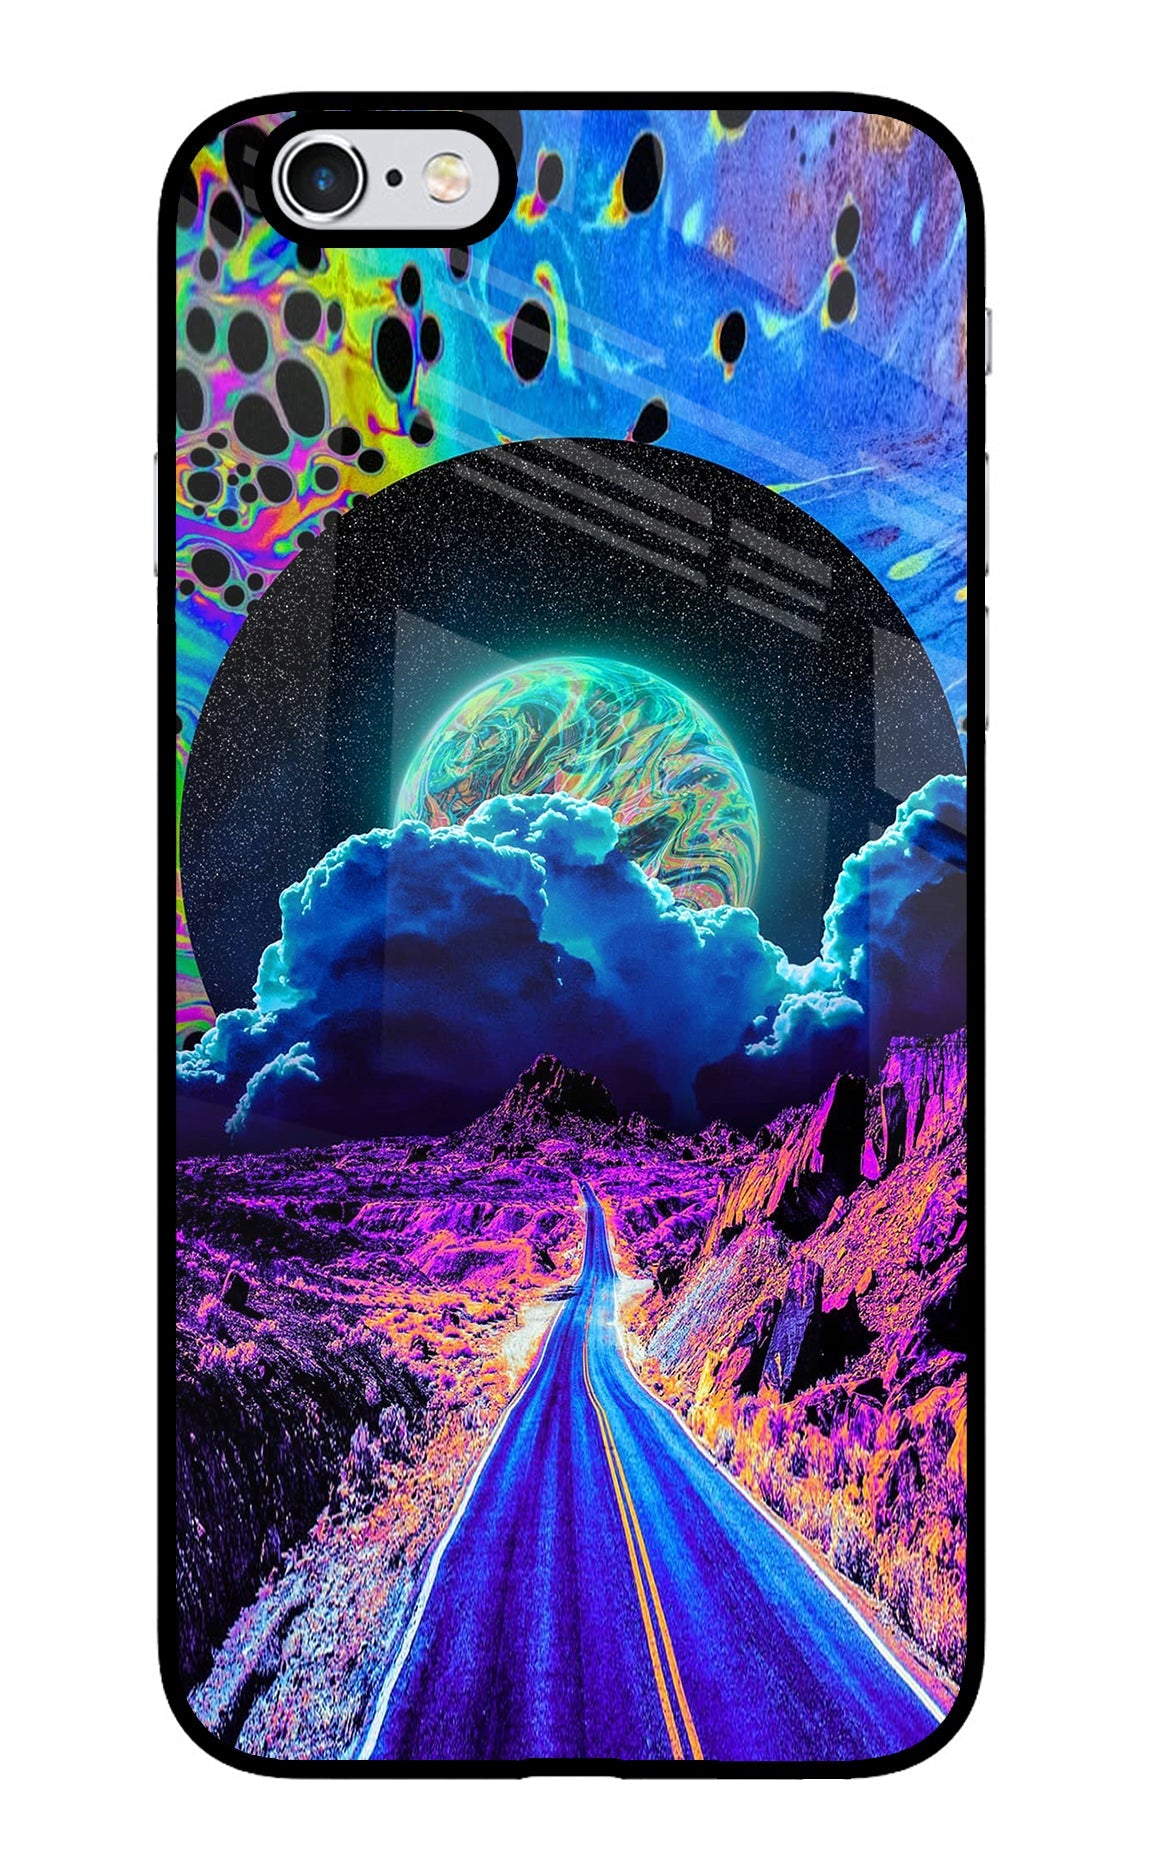 Psychedelic Painting iPhone 6/6s Glass Case